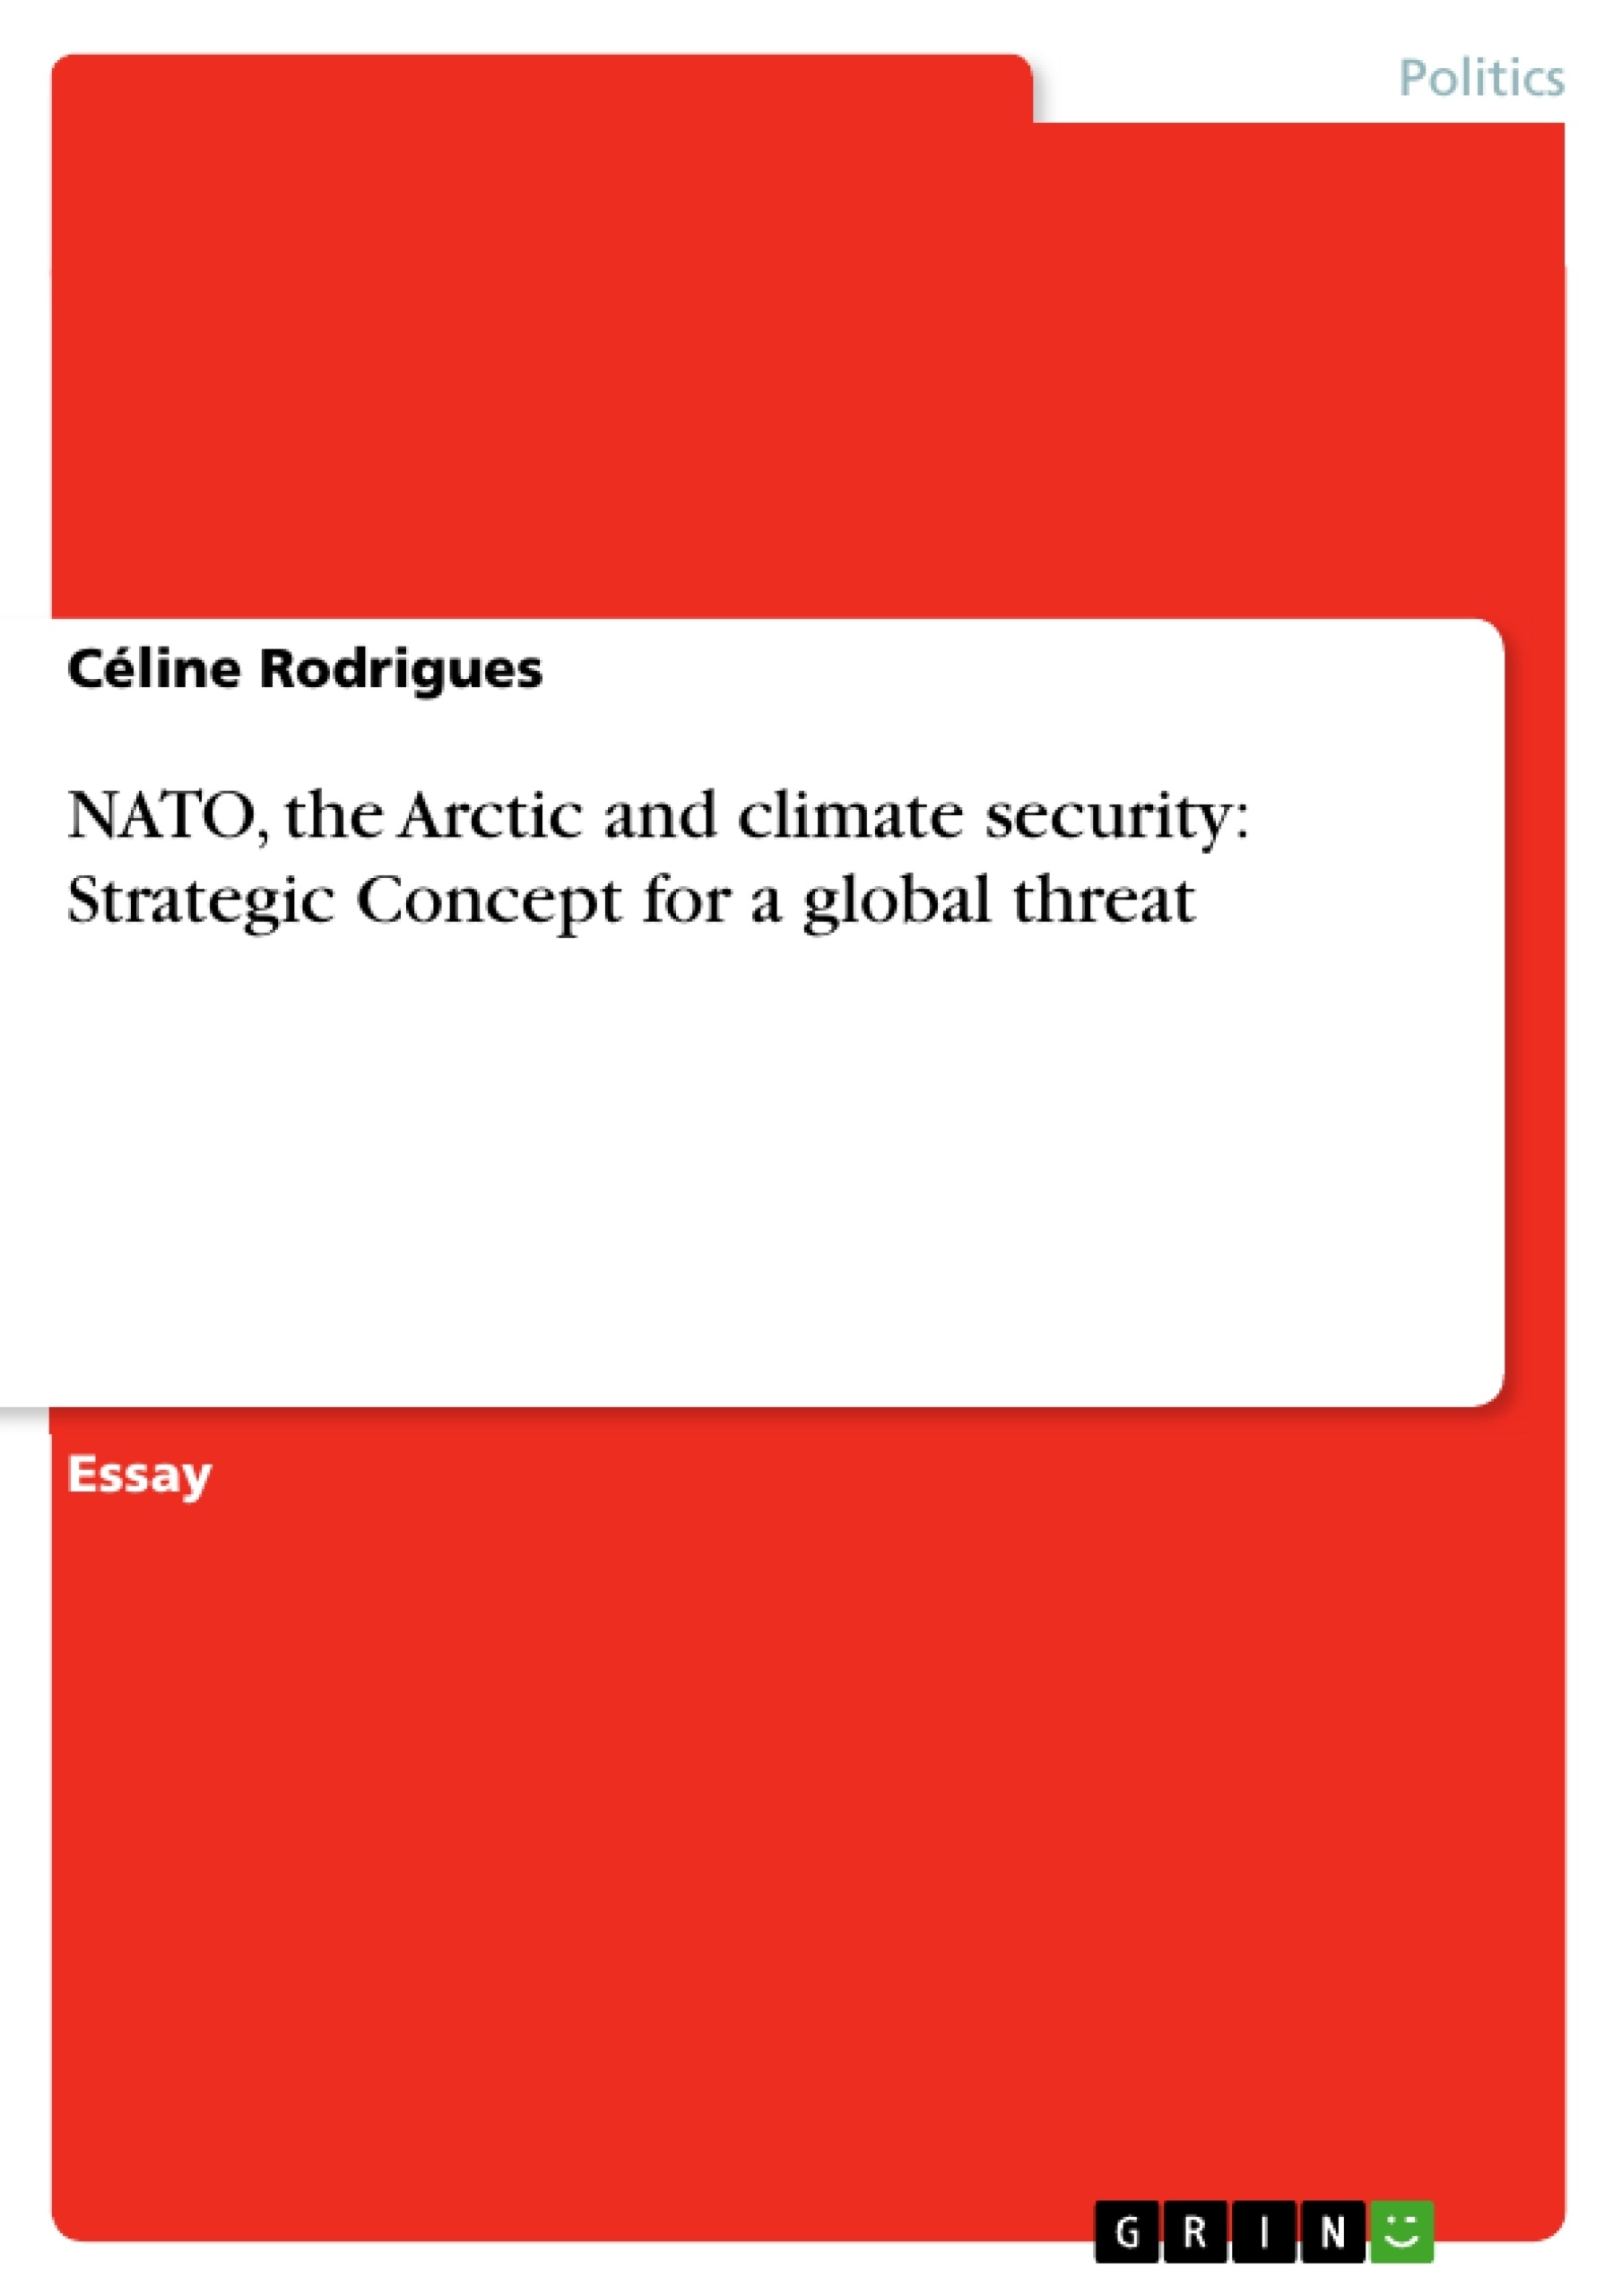 Título: NATO, the Arctic and climate security: Strategic Concept for a global threat